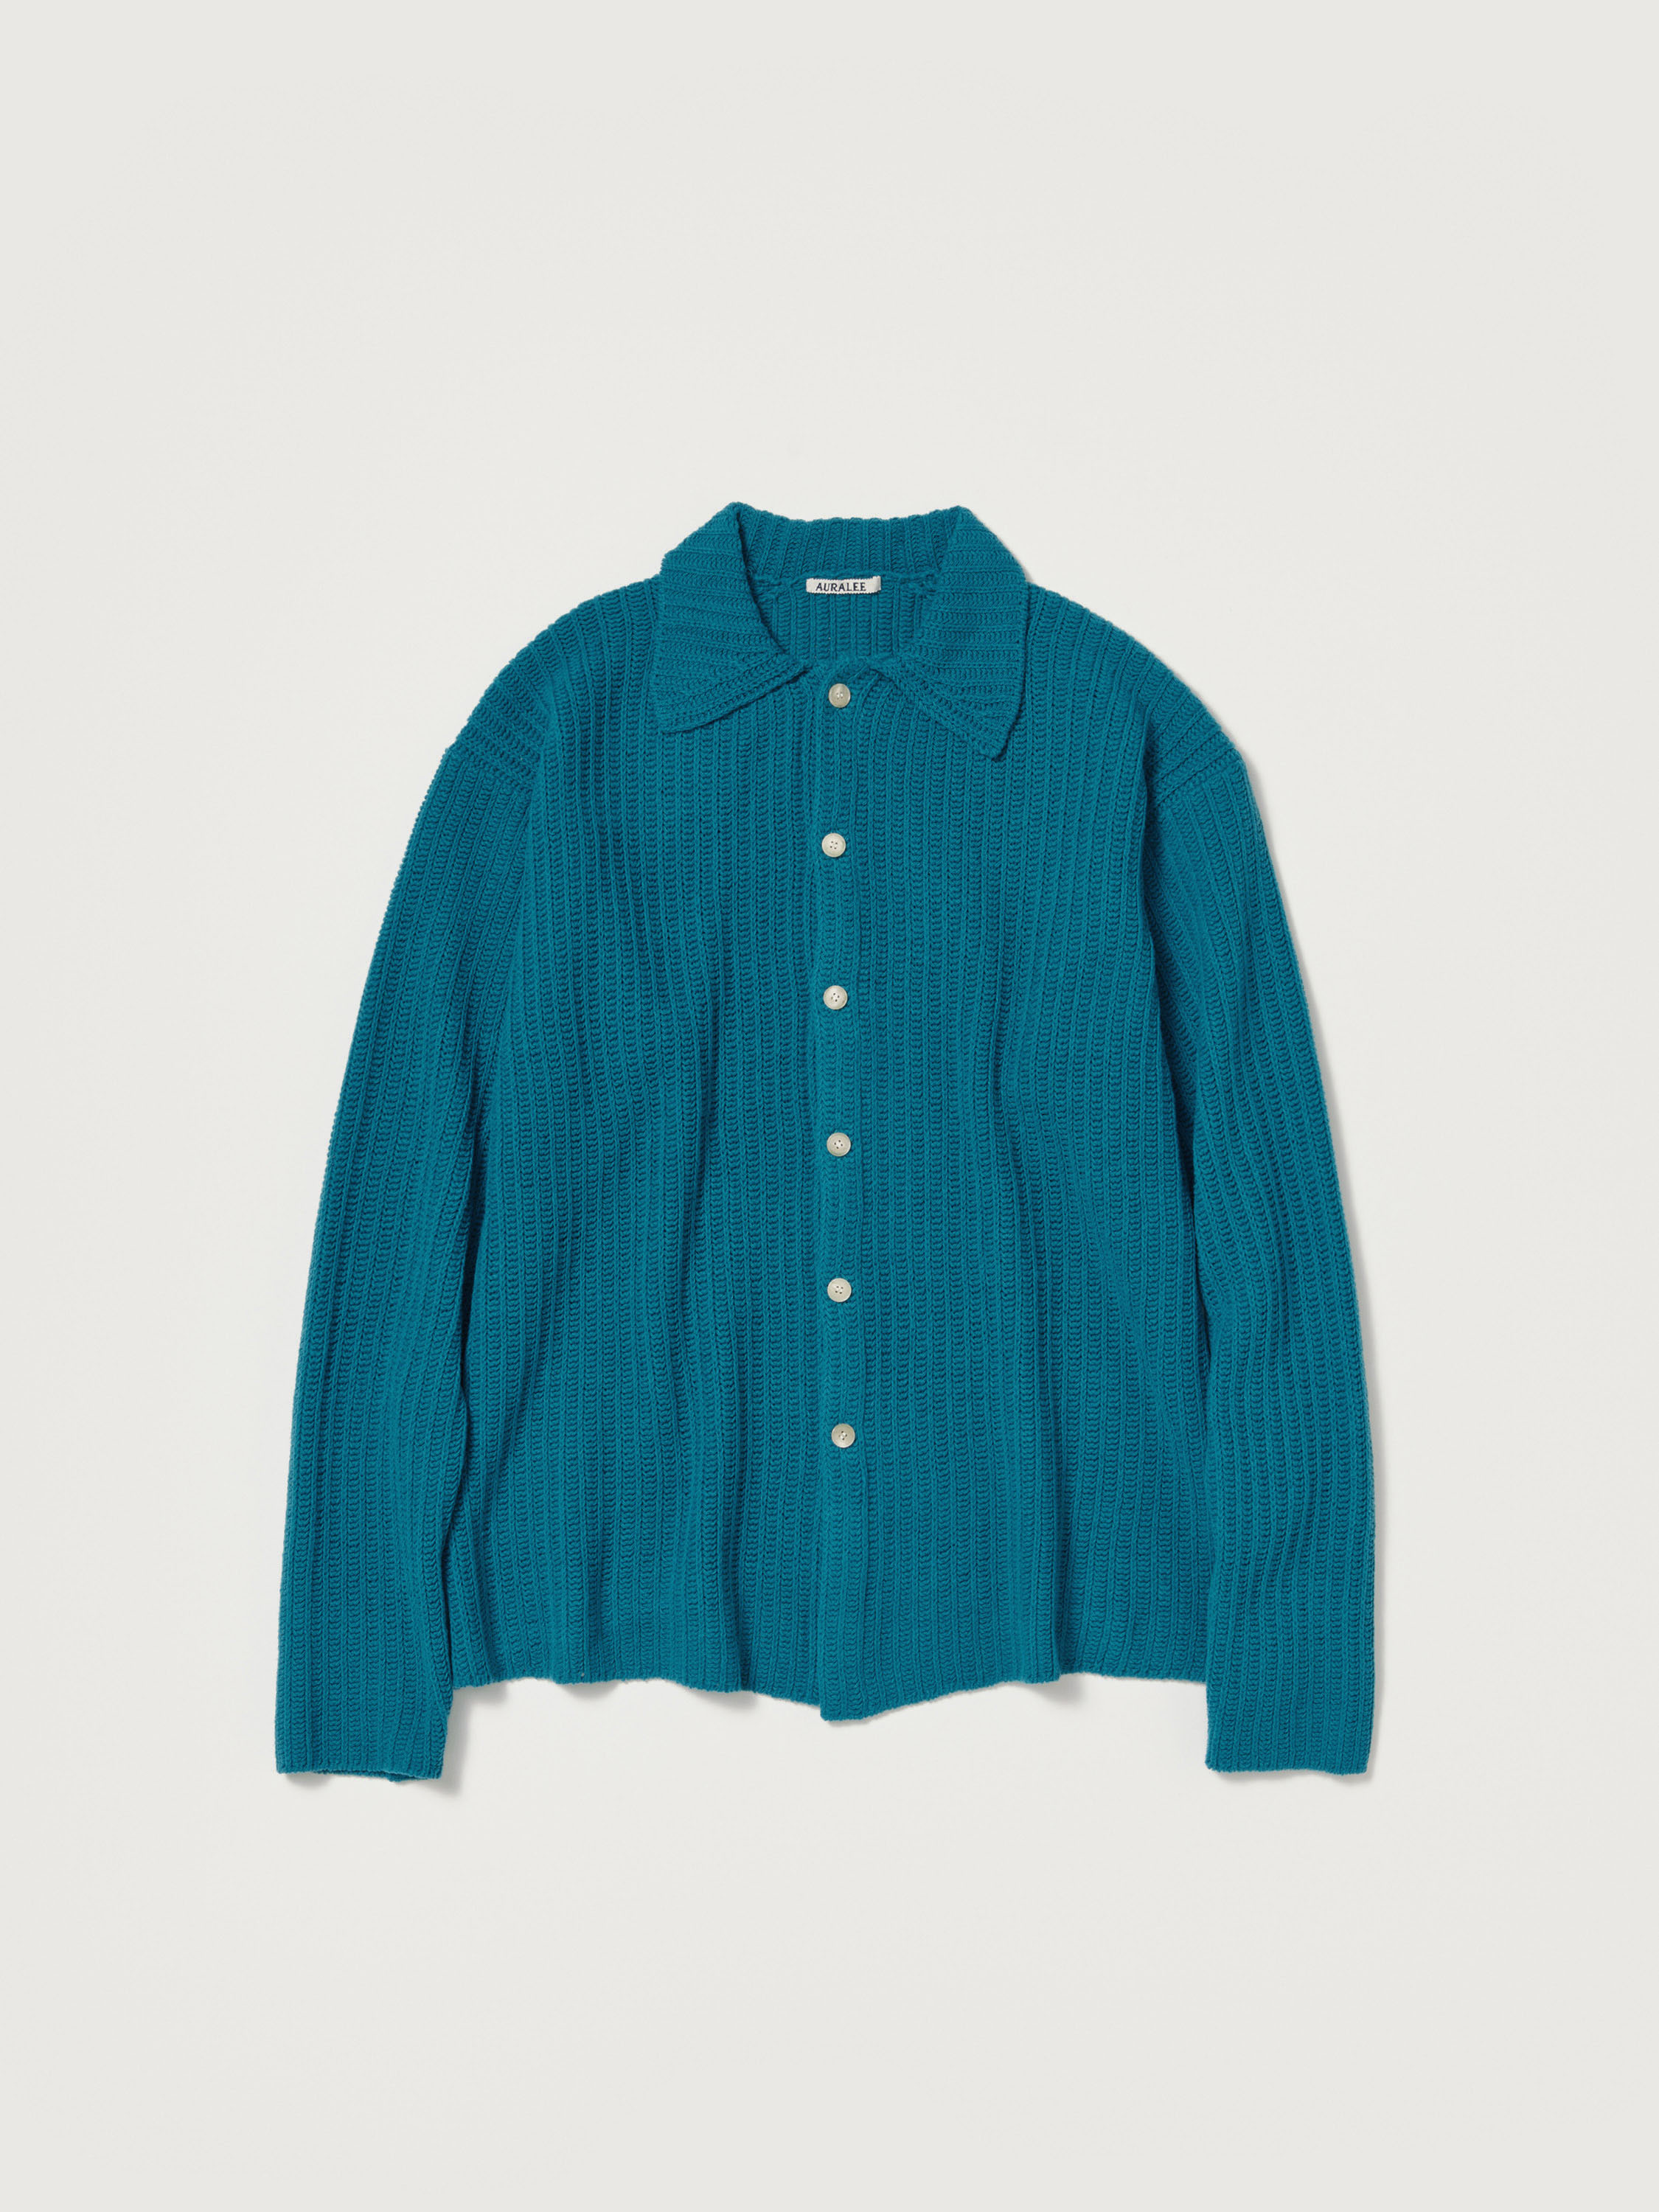 BRUSHED COTTON WOOL RIB KNIT SHIRT - AURALEE Official Website